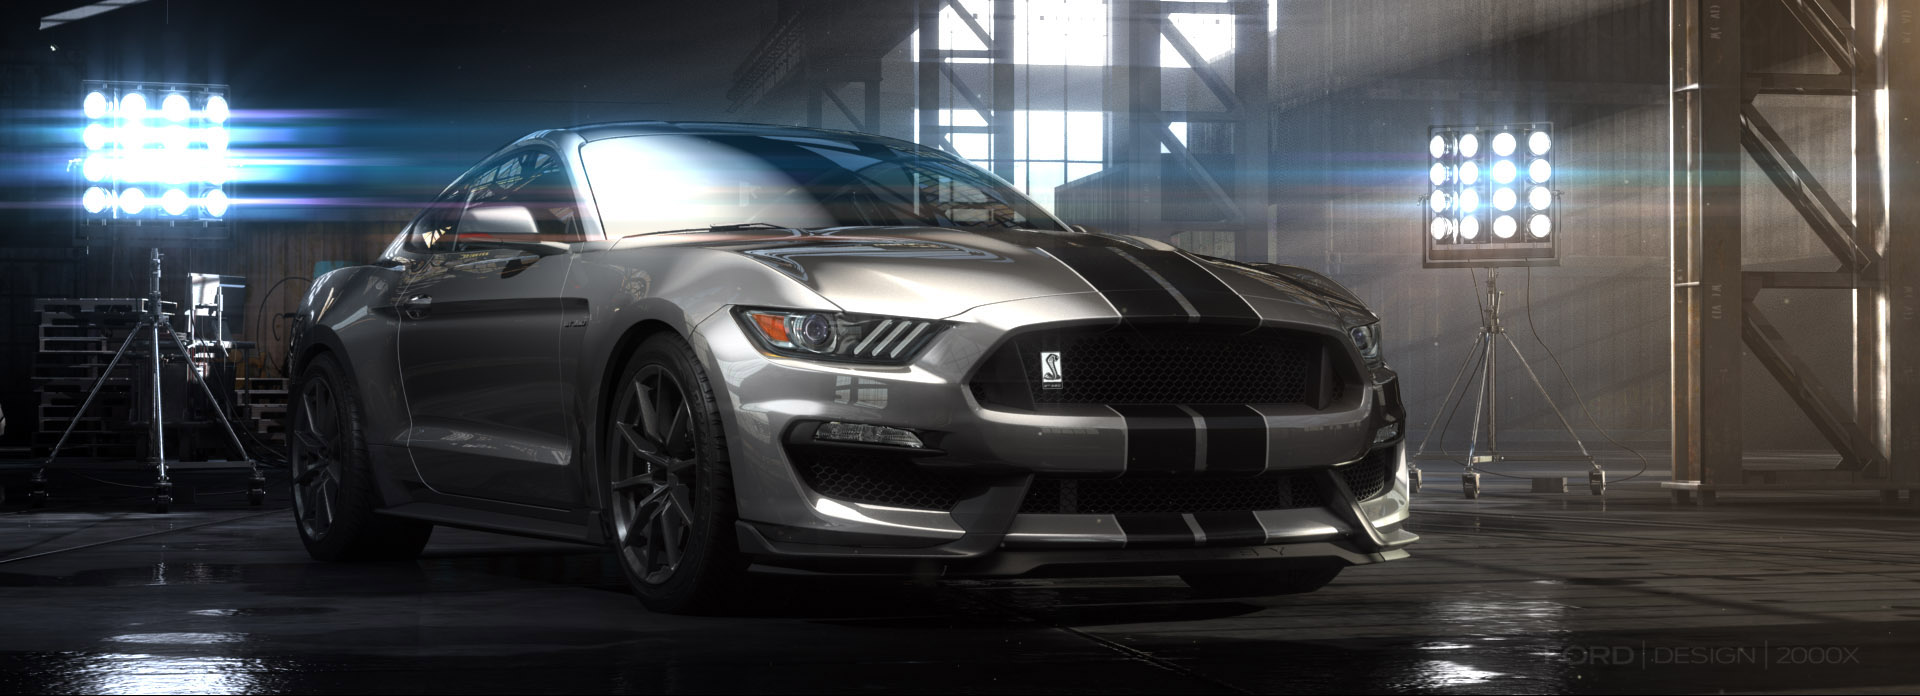 Ford Mustang Shelby GT350 photo #1